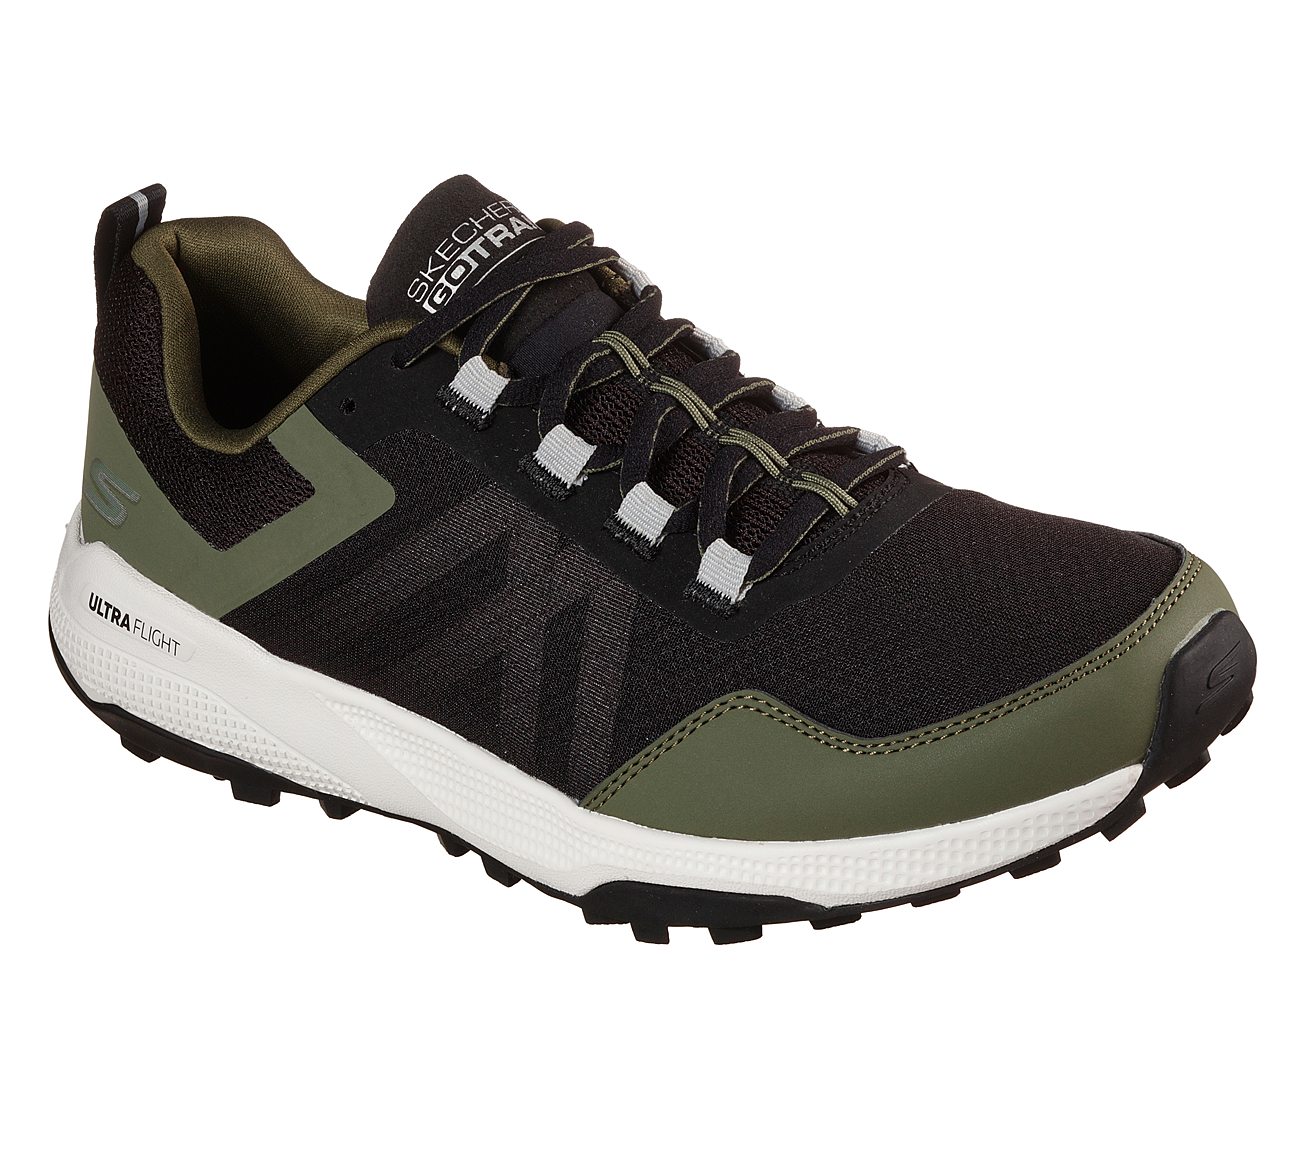 PURE TRAIL, GREY/BLACK Footwear Right View